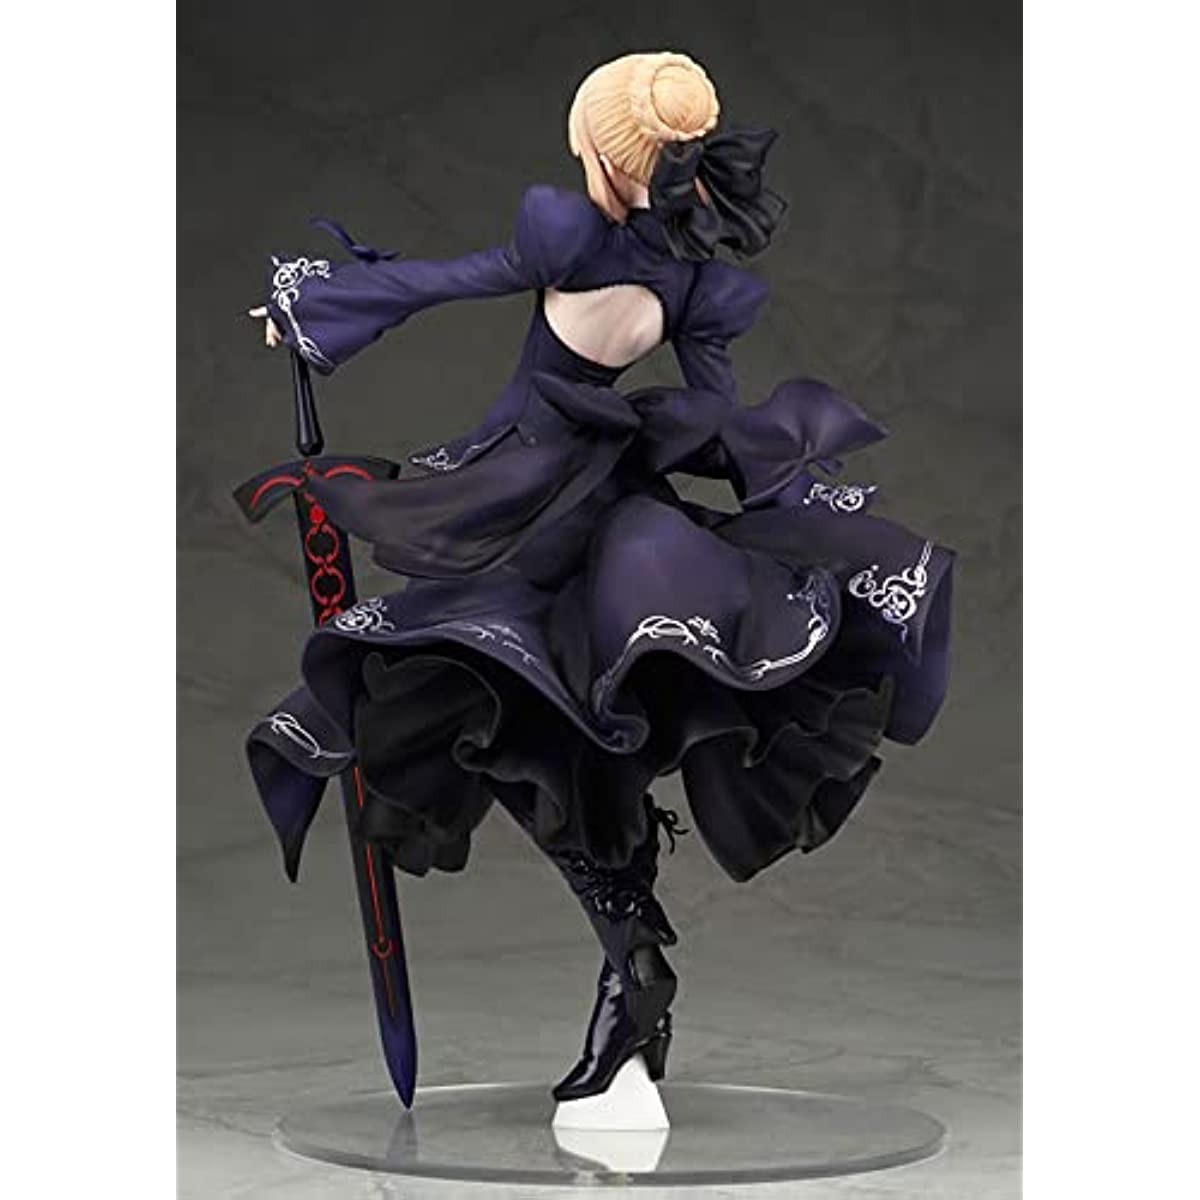 Best Places to Buy Anime Statues From